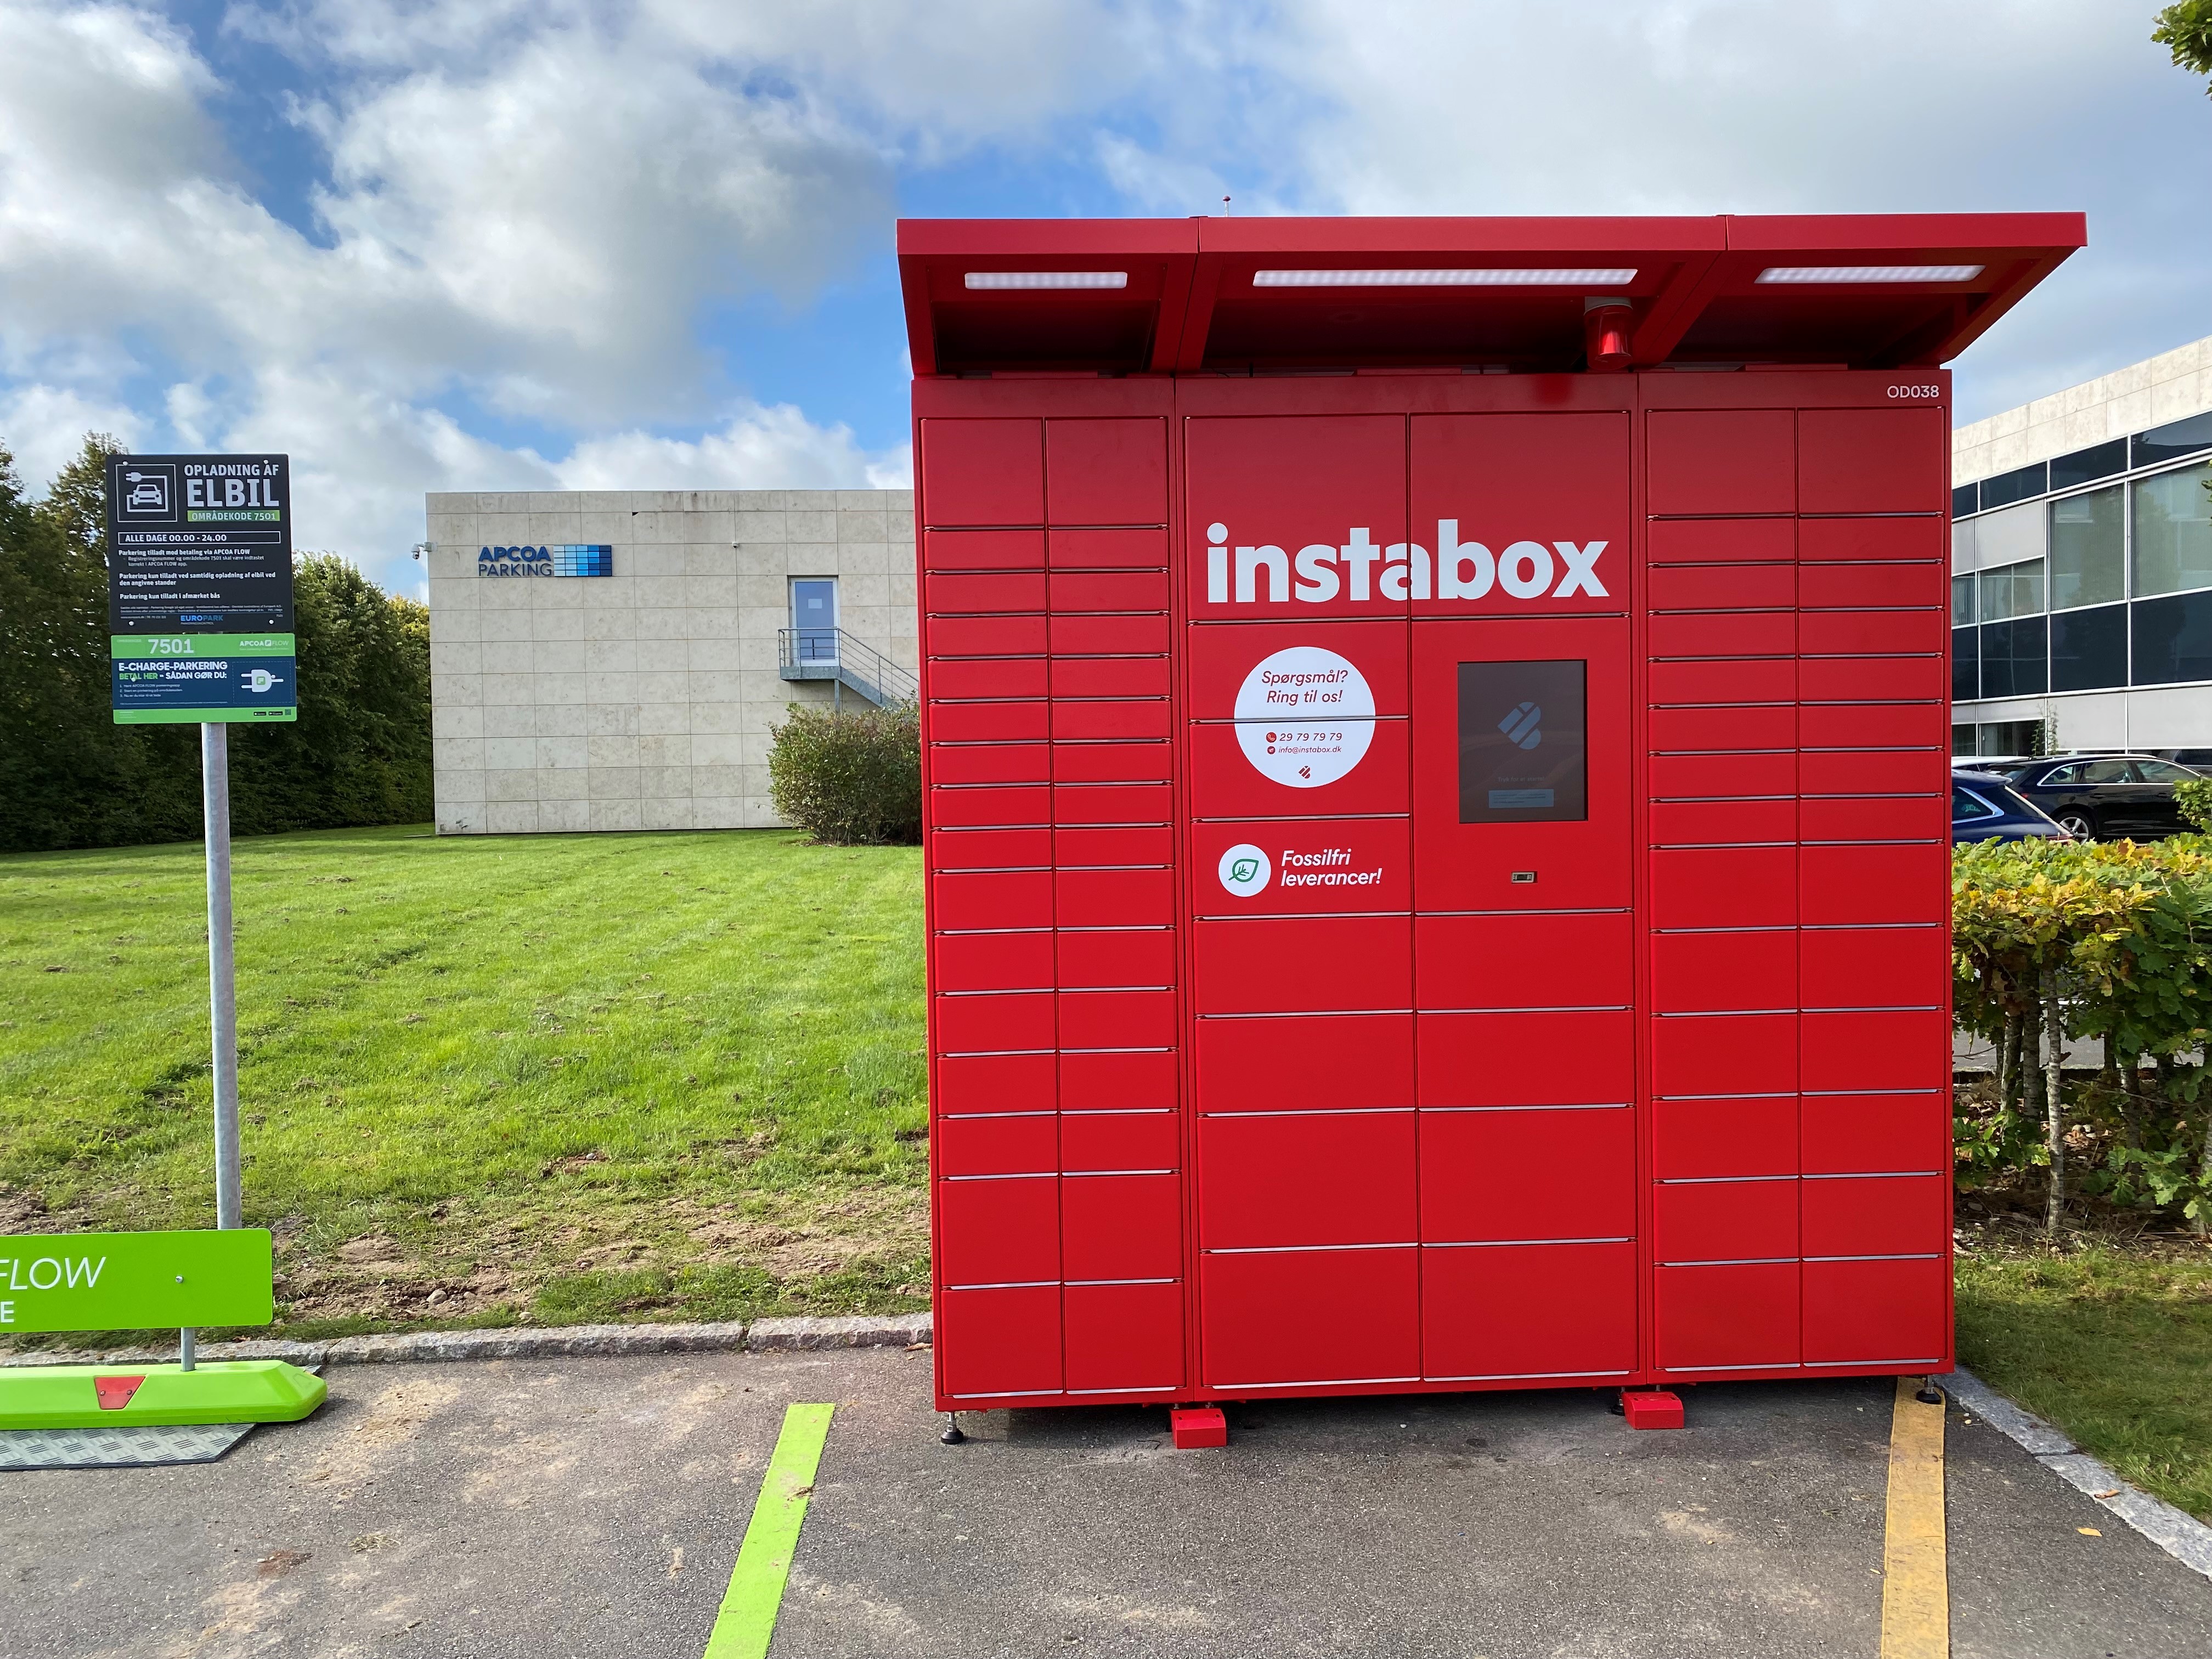 With the new partnership between APCOA and Instabox, Danes will now be able to pick up parcels directly from the parking lot 